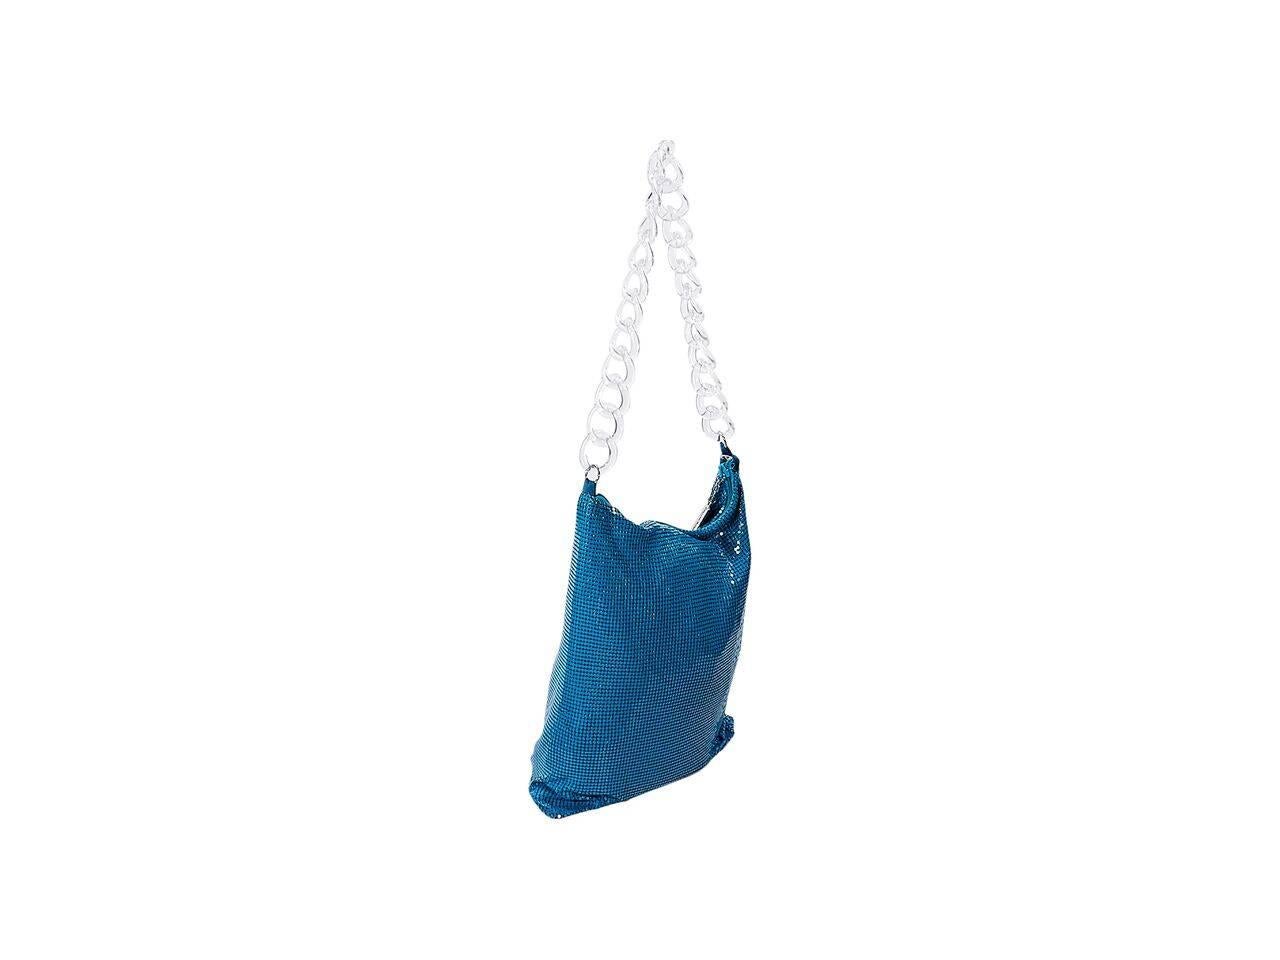 Product details:  Blue mesh shoulder bag by Whiting & Davis.  Clear chain shoulder strap.  Top zip closure.  Lined interior with inner slide pockets.  Silvertone hardware.  9.5